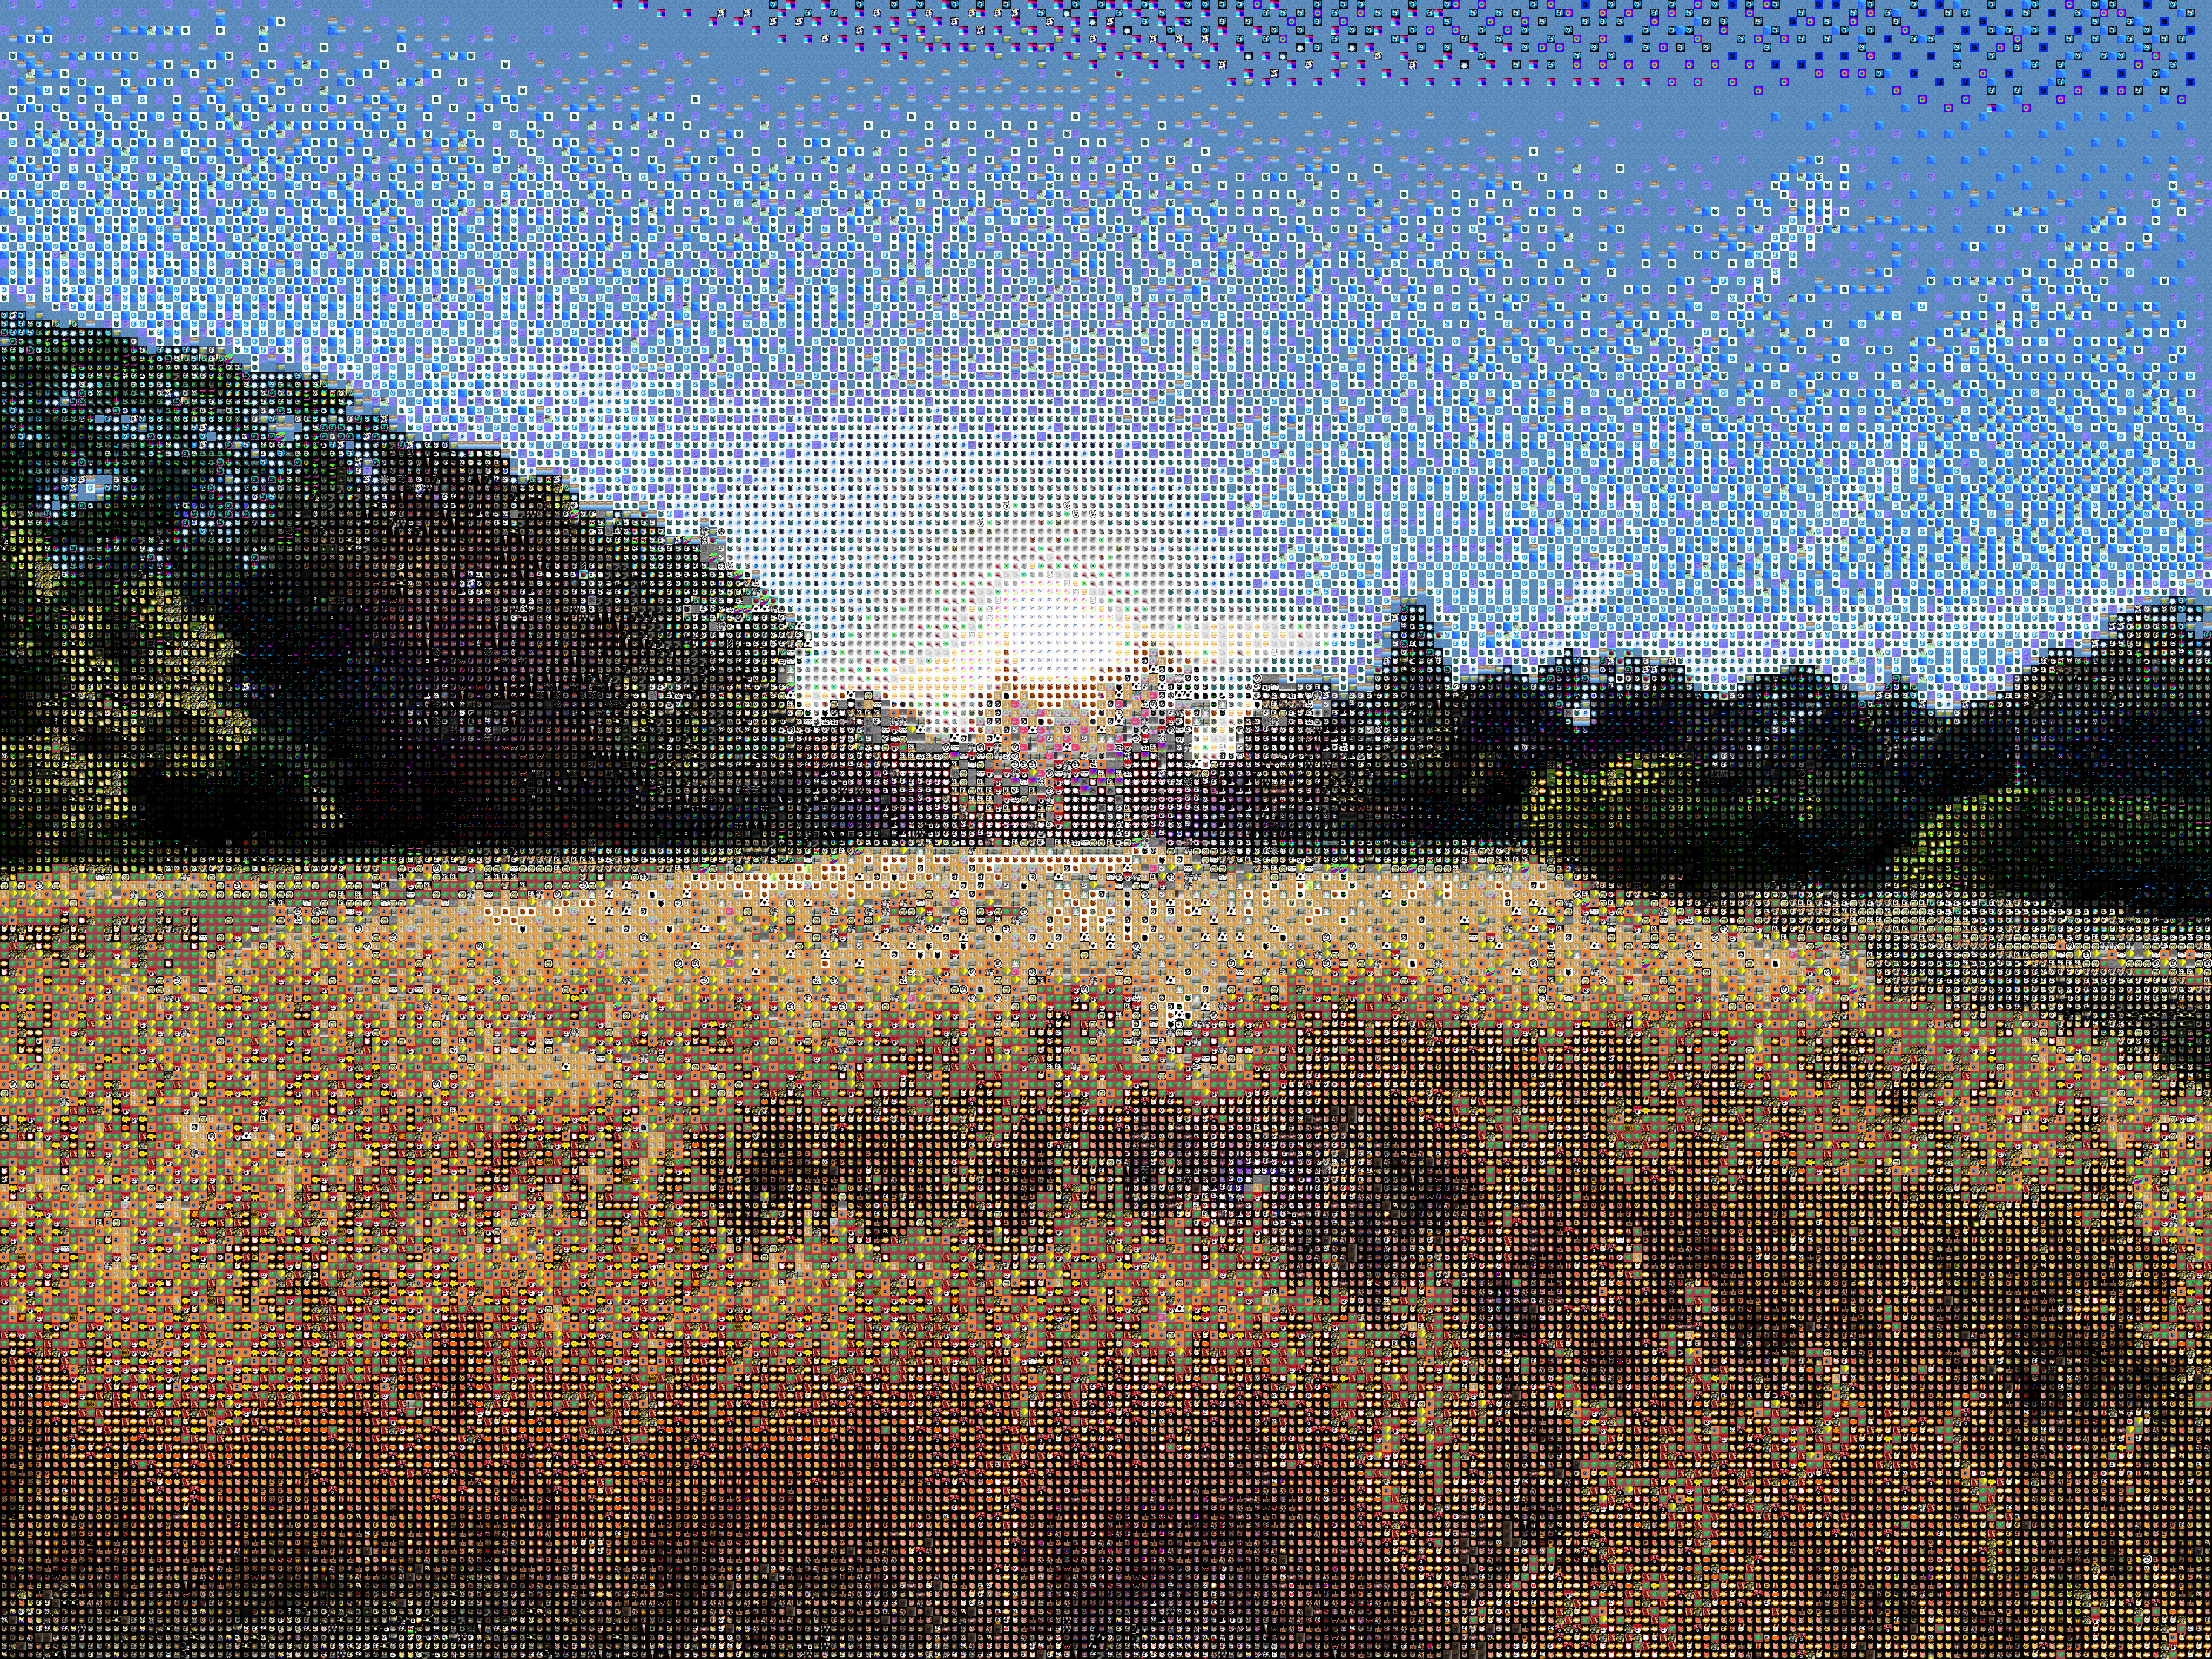 Another example output of a photo of a wheat field